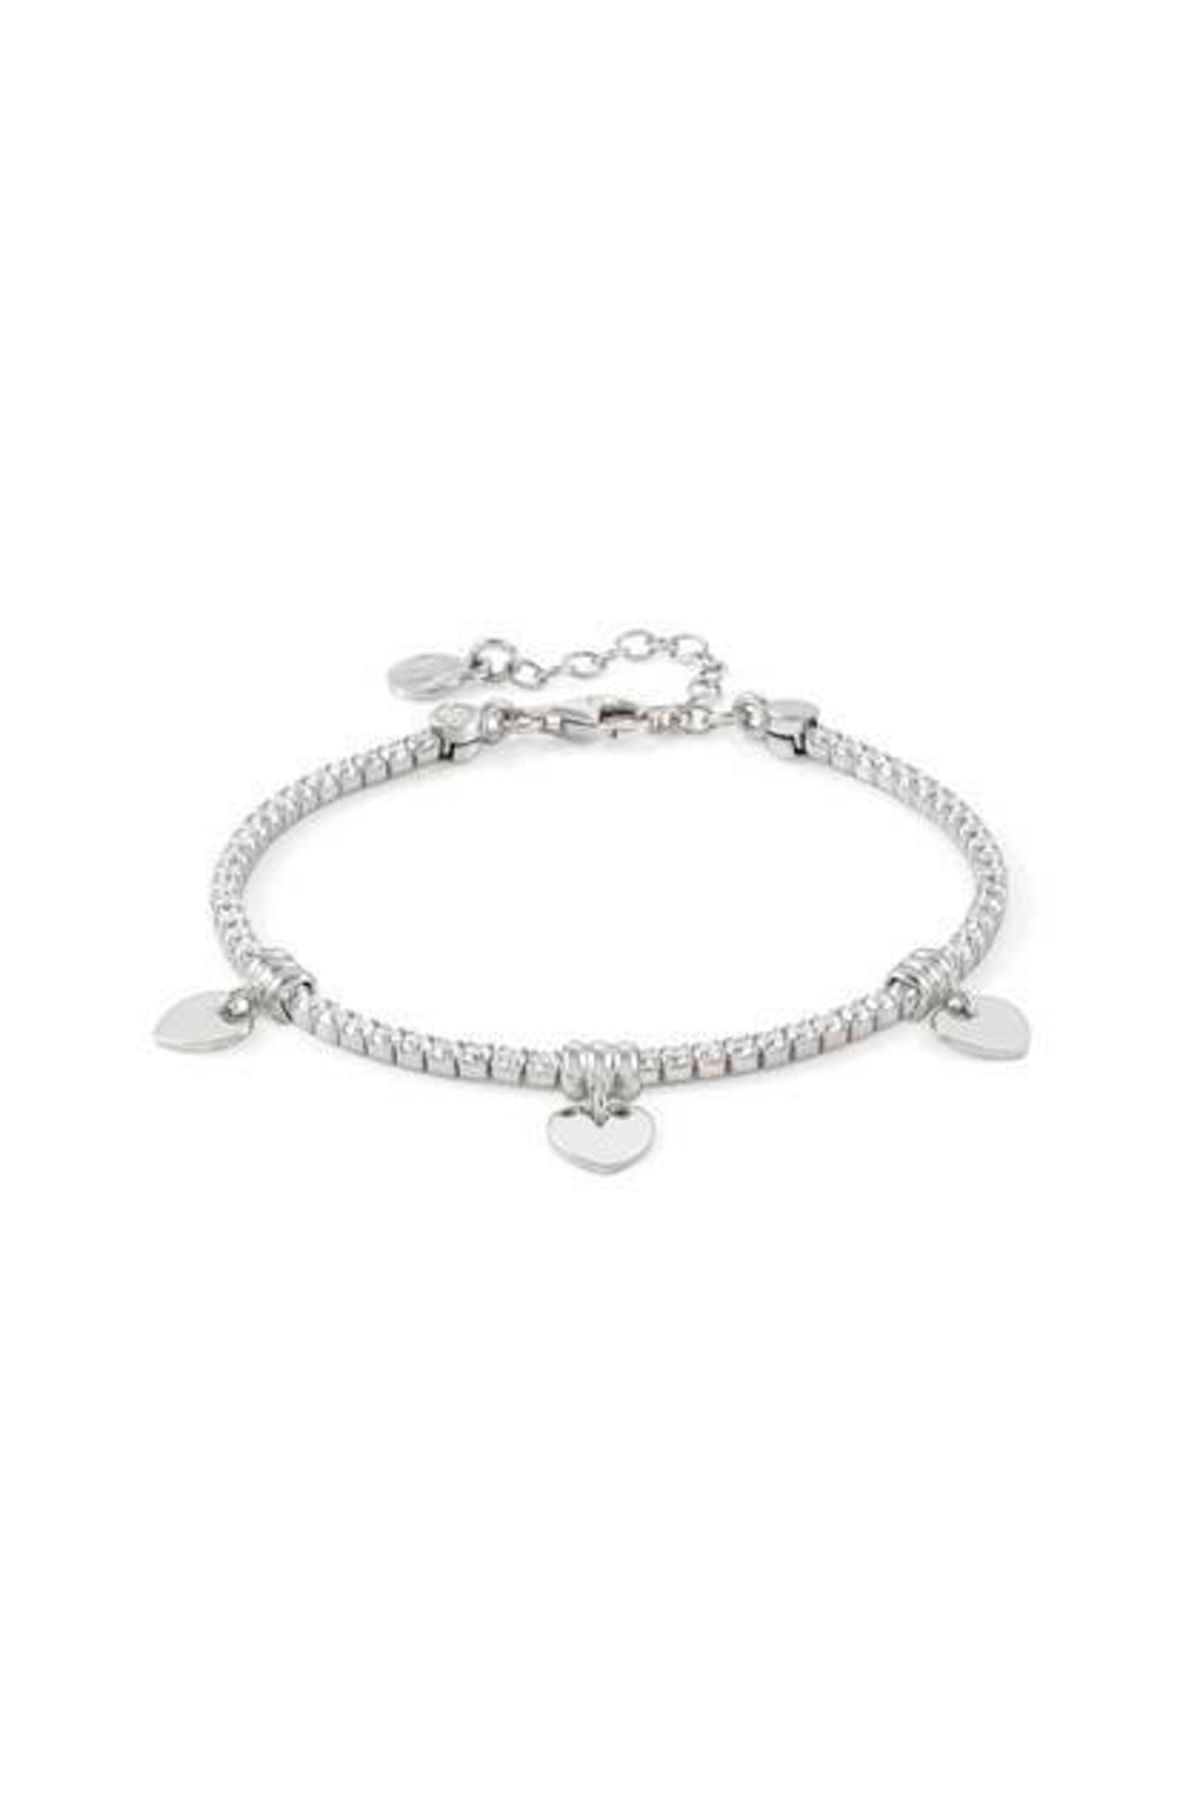 NOMİNATİON Chıc&charm Bracelet In 925 Silver And Cubic Zirconia (001_silver Heart)